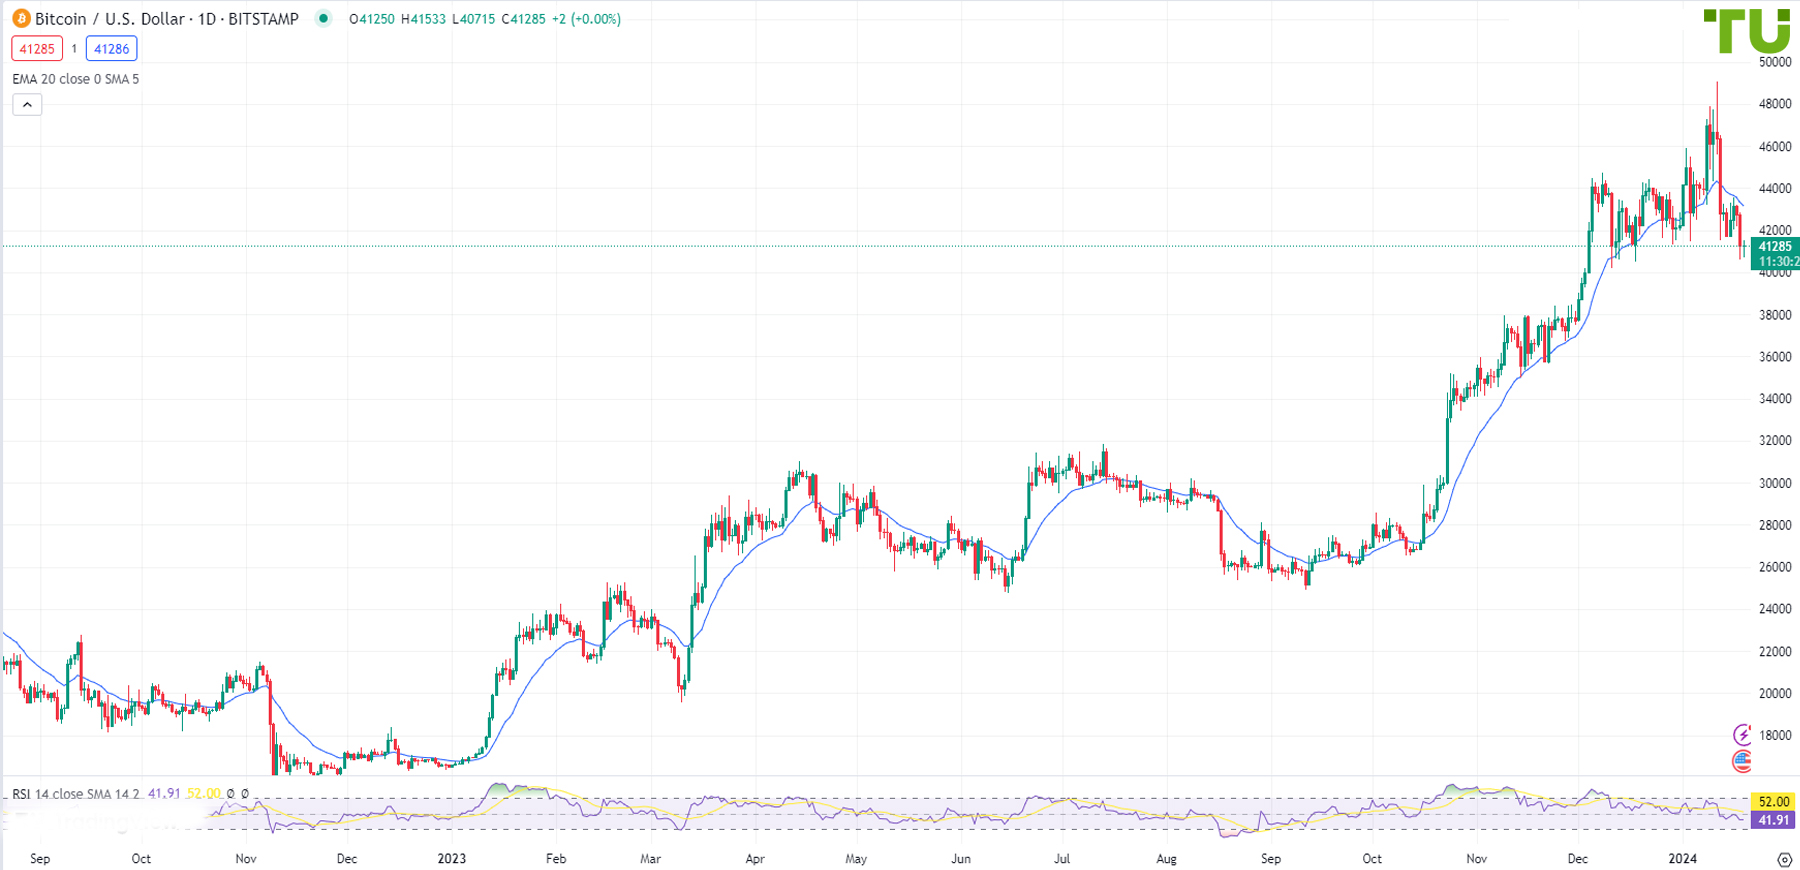 BTC/USD fell in price after rising to 49040 level